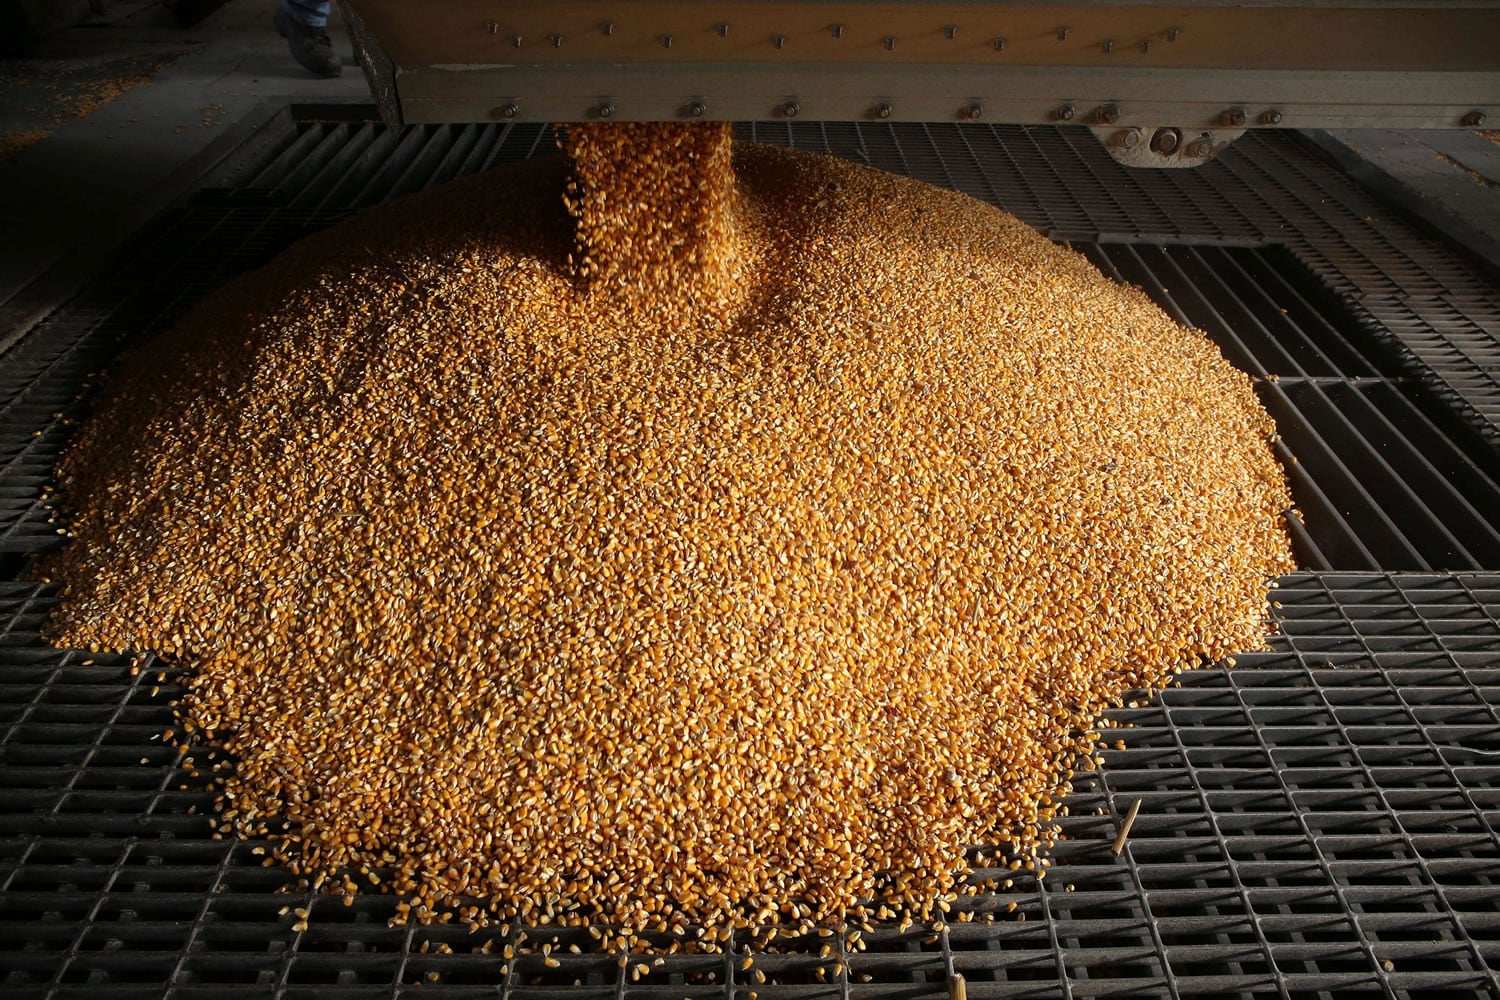 Non-GMO corn produced by farmer Matthew Starr is emptied into non-GMO butlers at a grain storage company on Wed., March 9, 2016 in Nauvoo, Ill.